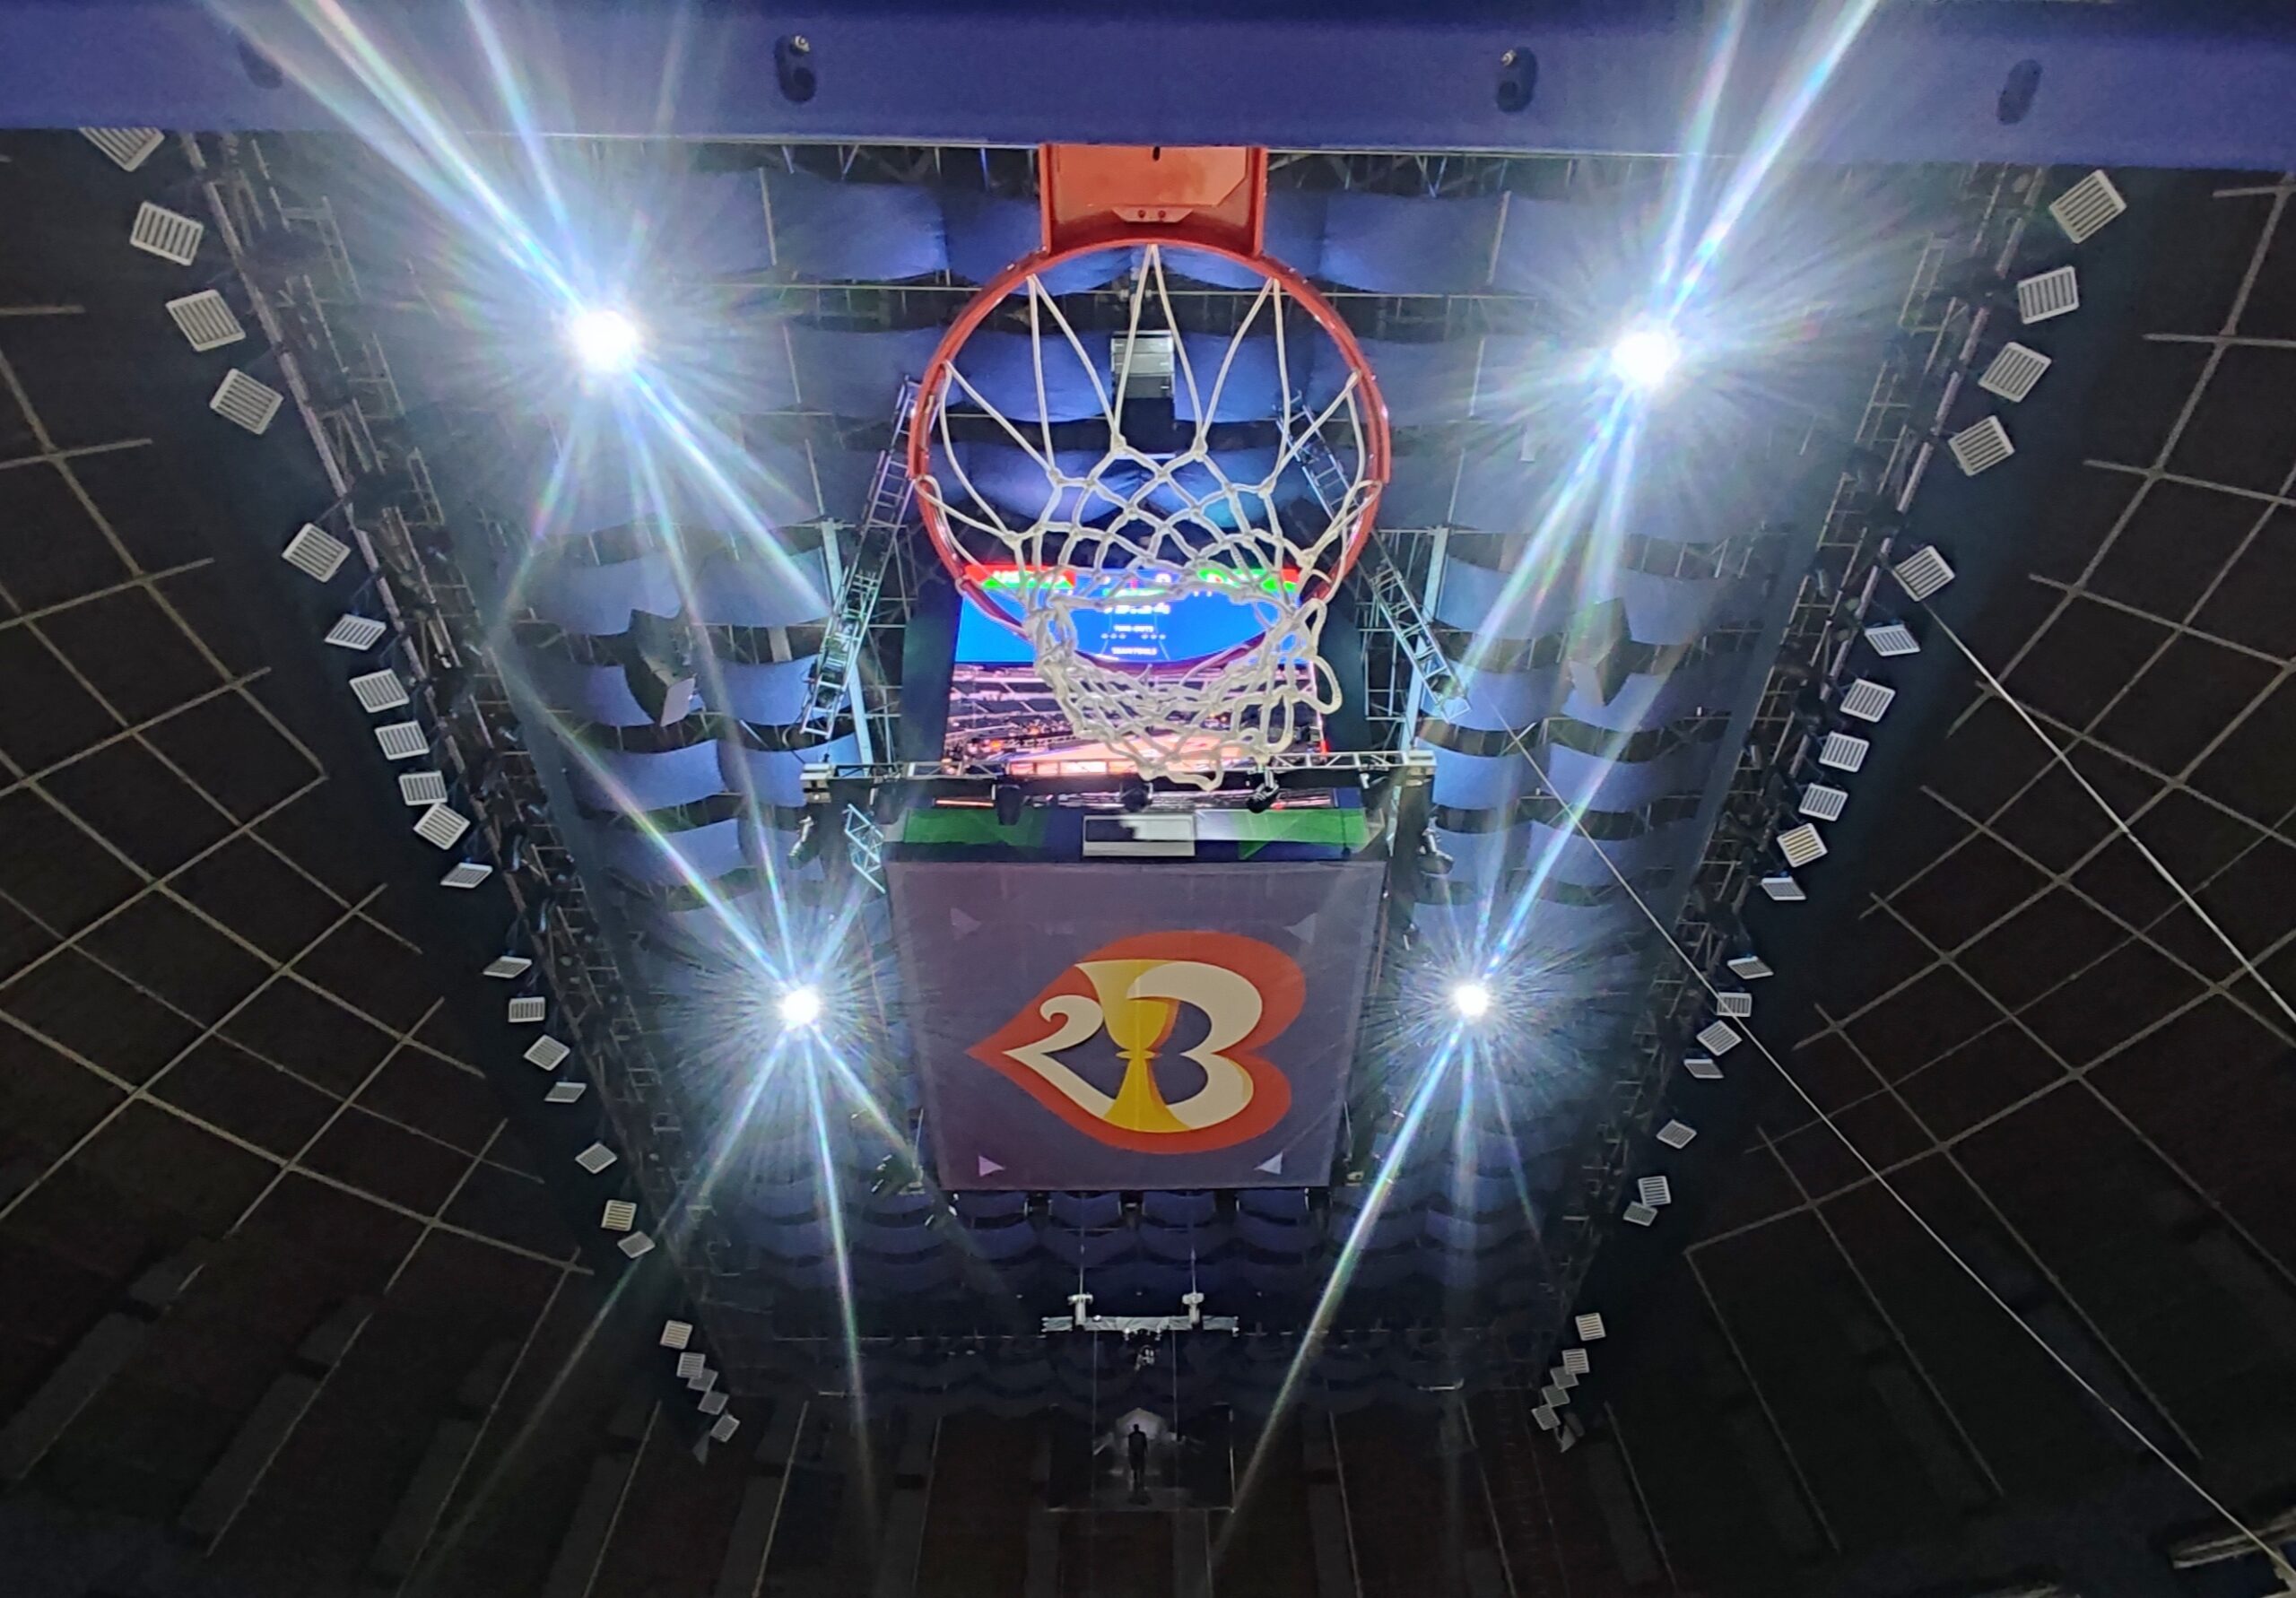 The Araneta Coliseum is already spruced up and ready to host another historic sporting event. —AUGUST DELA CRUZ